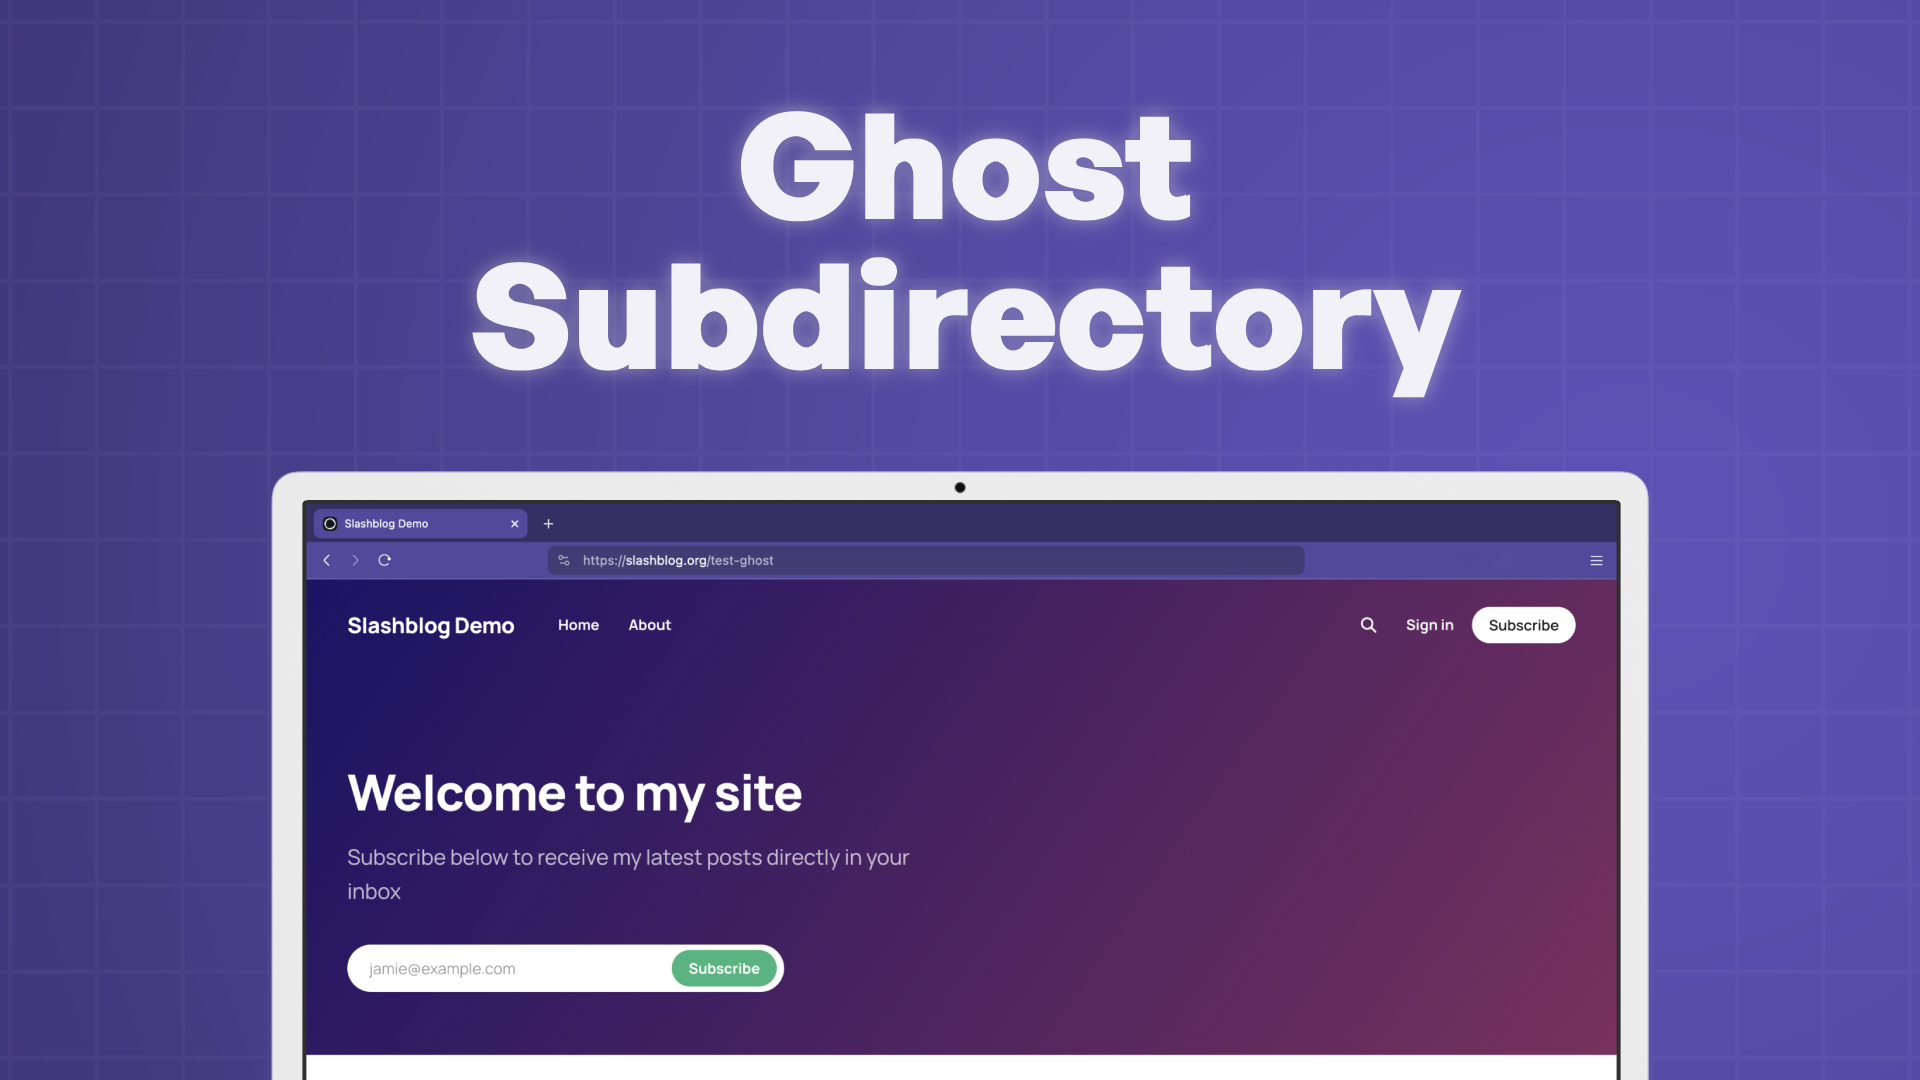 "Ghost Subdirectory" with screenshot of a Ghost site serving from a subdirectory